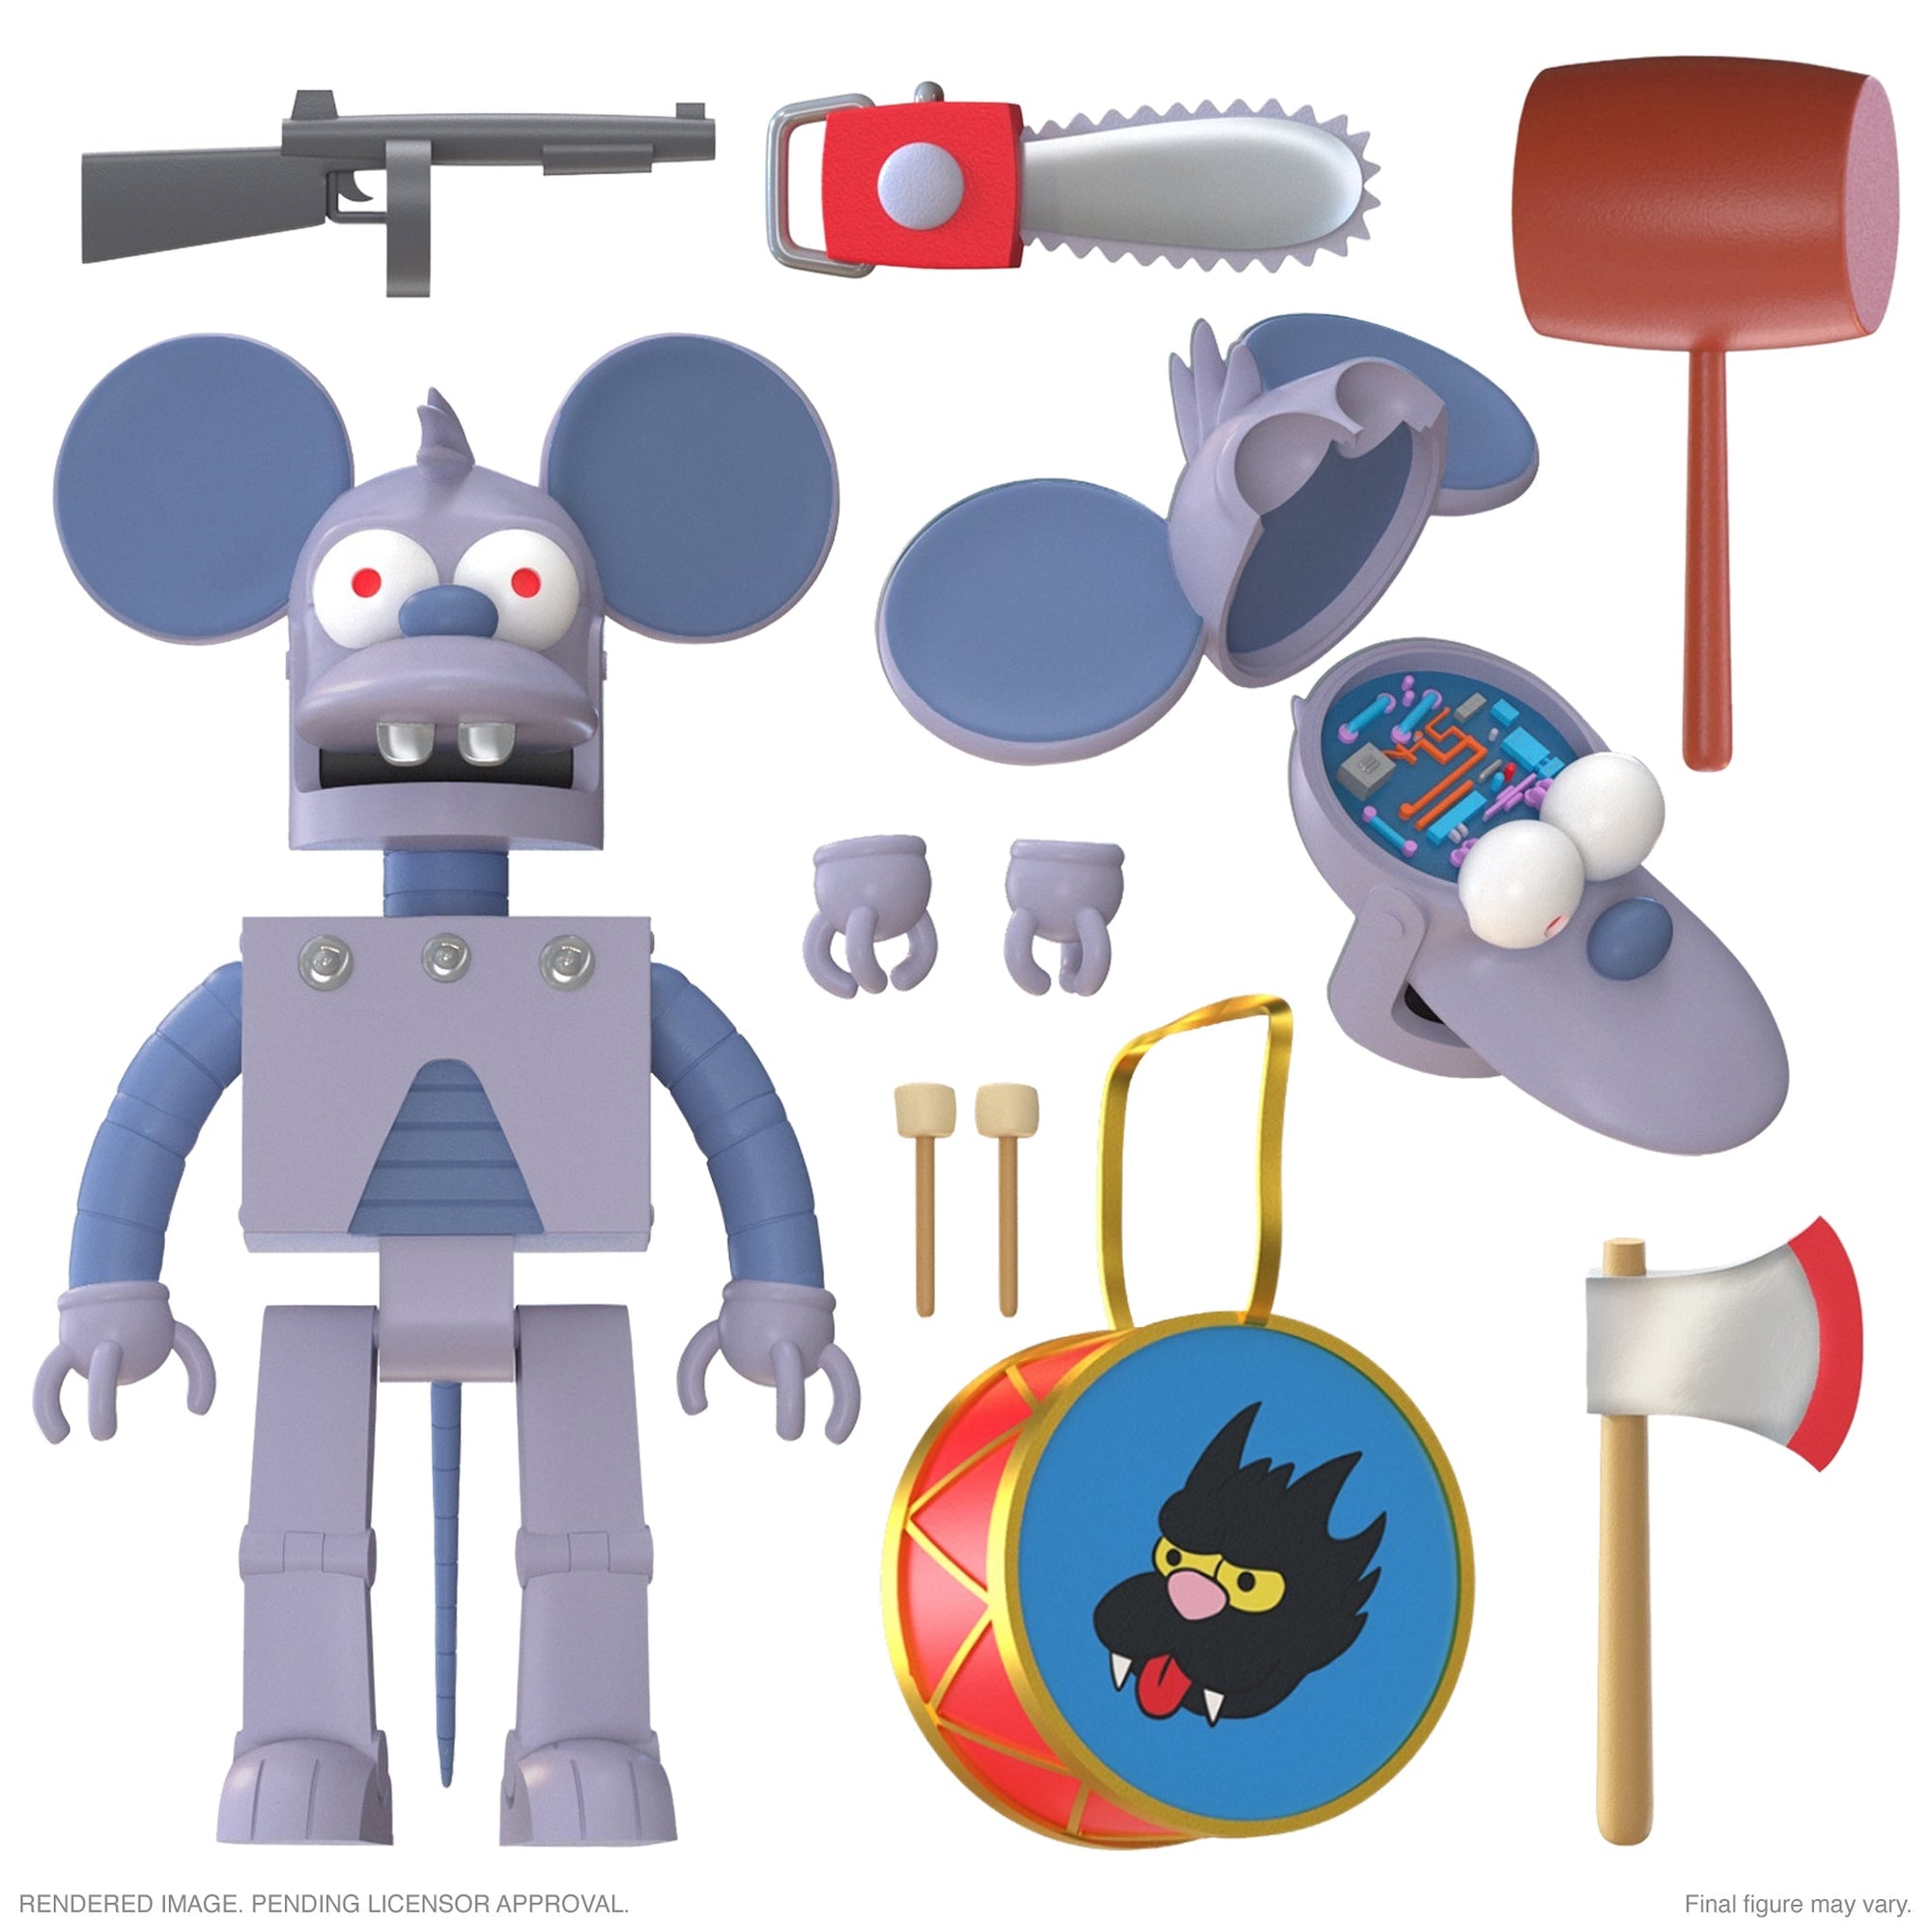 The Simpsons Robot Itchy Ultimate Edition by Super7